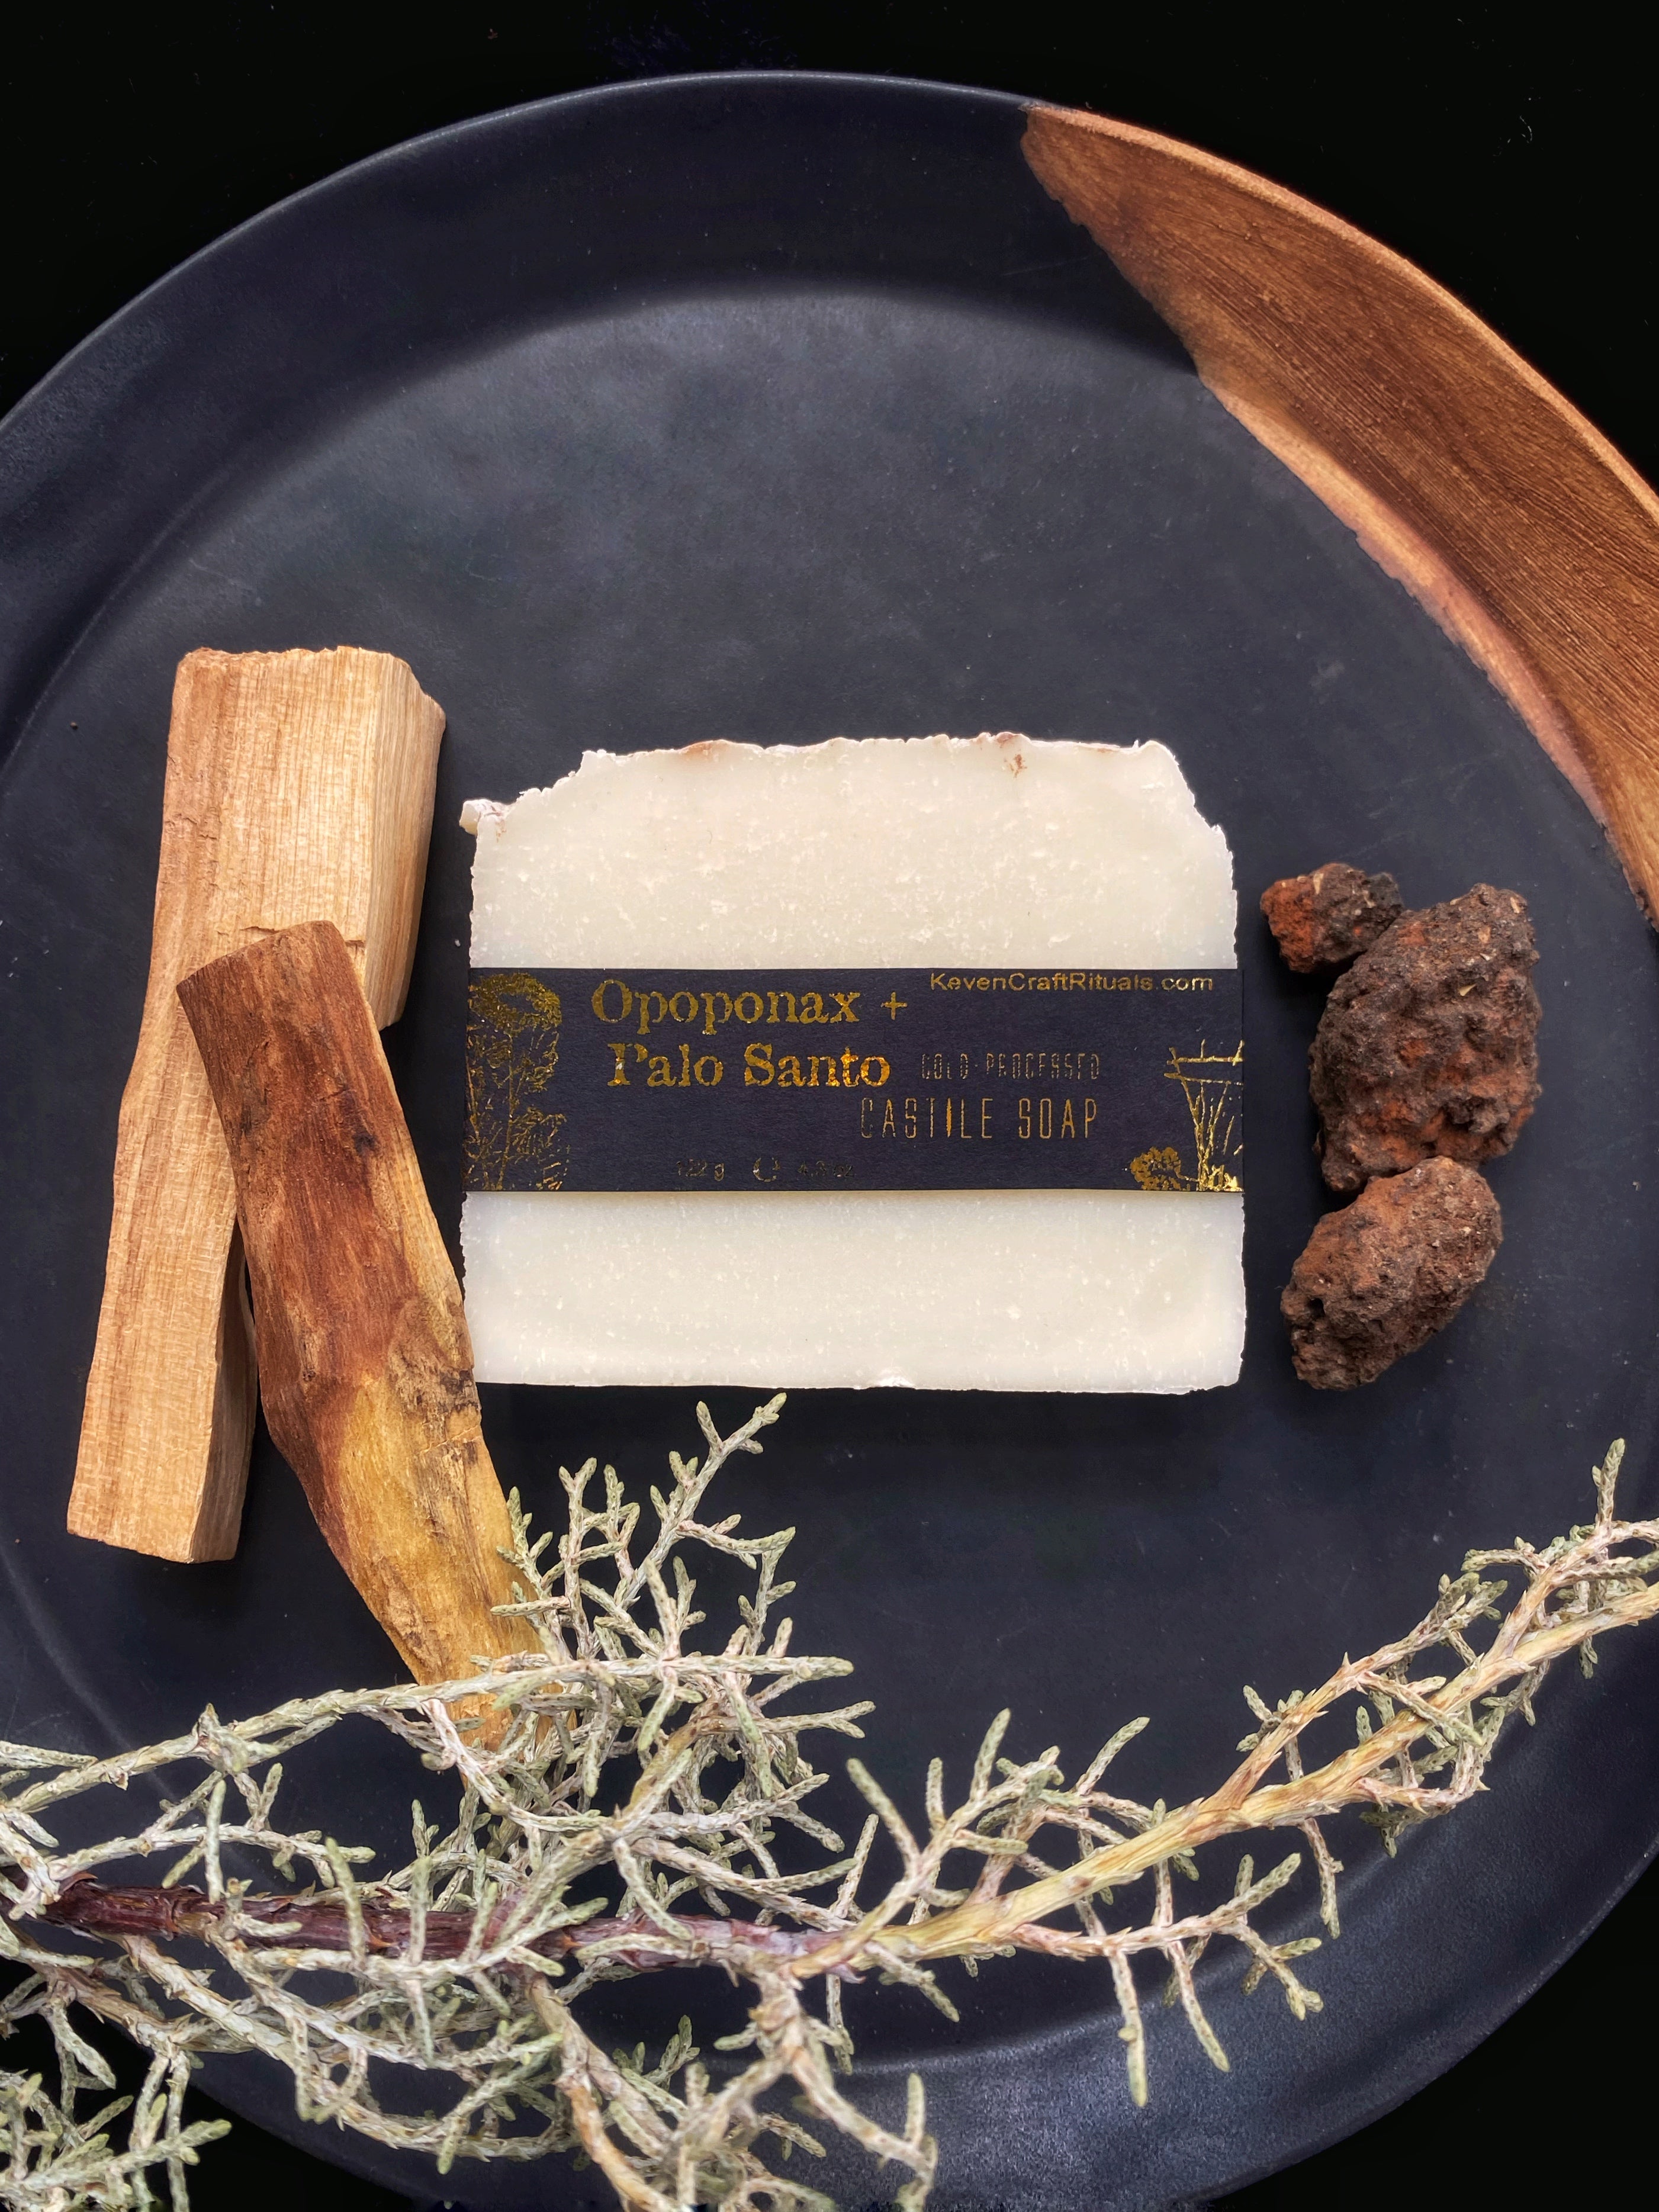 Opoponax + Palo Santo - Artisan, Superfatted, Cold- Processed Castile Soap for the Face and Body